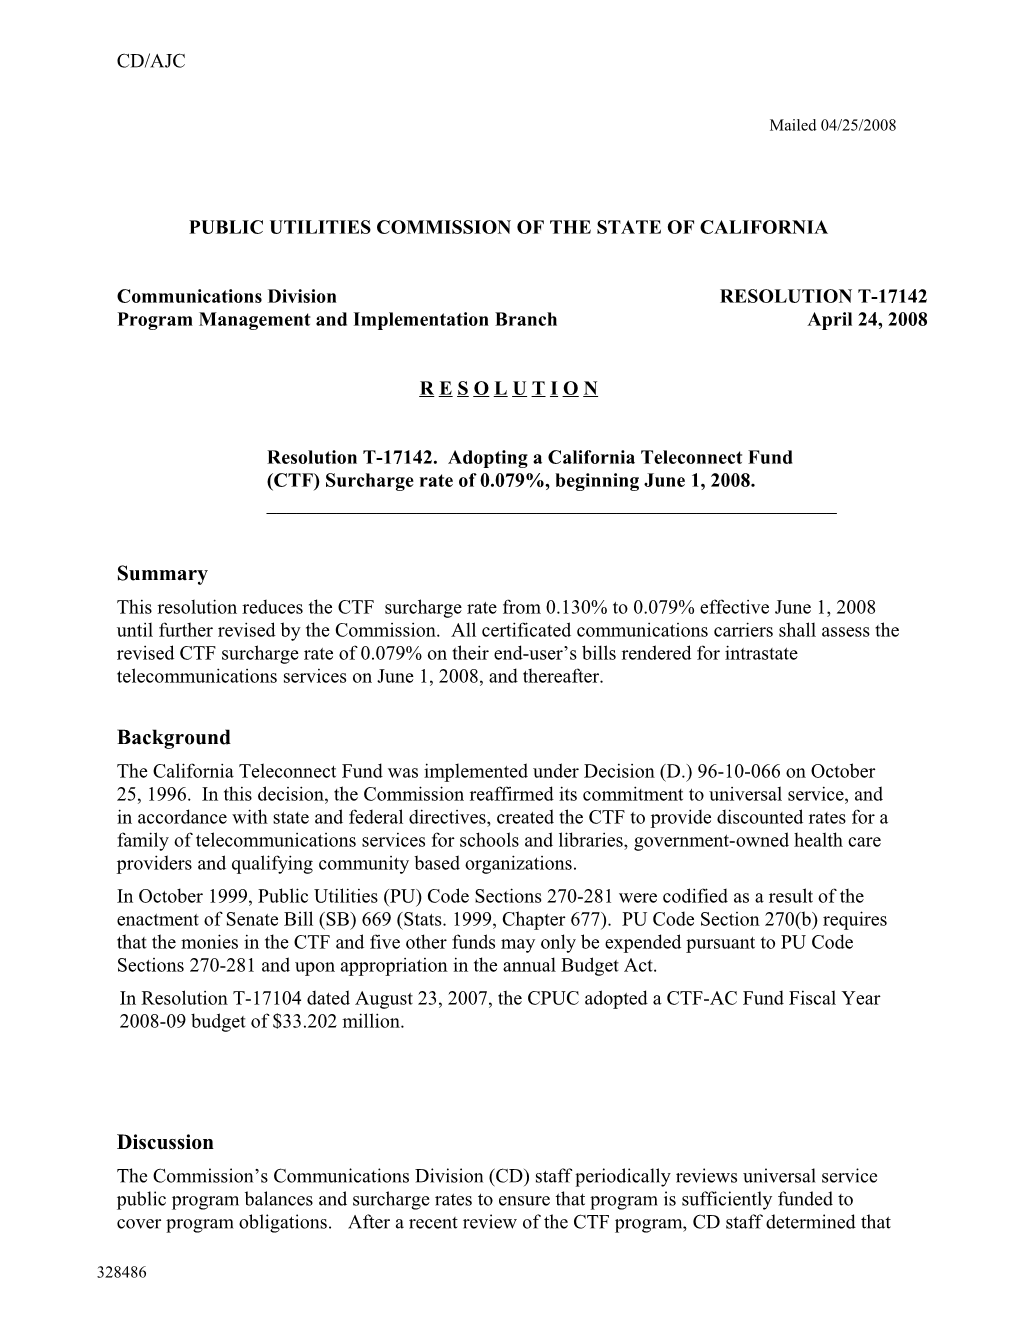 Public Utilities Commission of the State of California s121